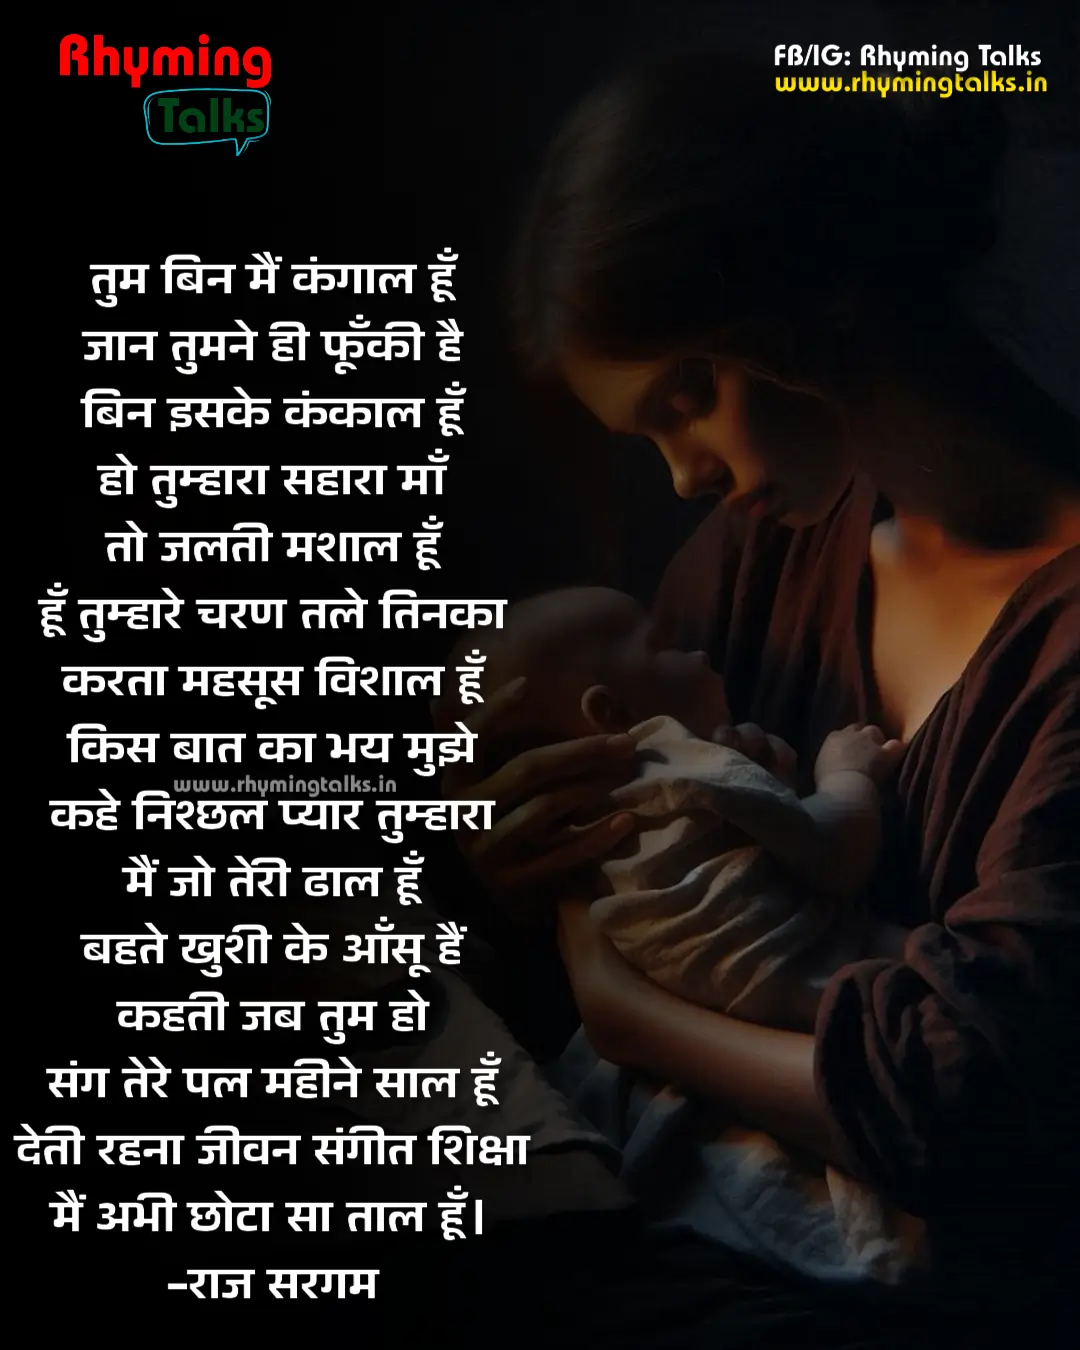 Quotes on Mother in Hindi images, maa par kavita in hindi images